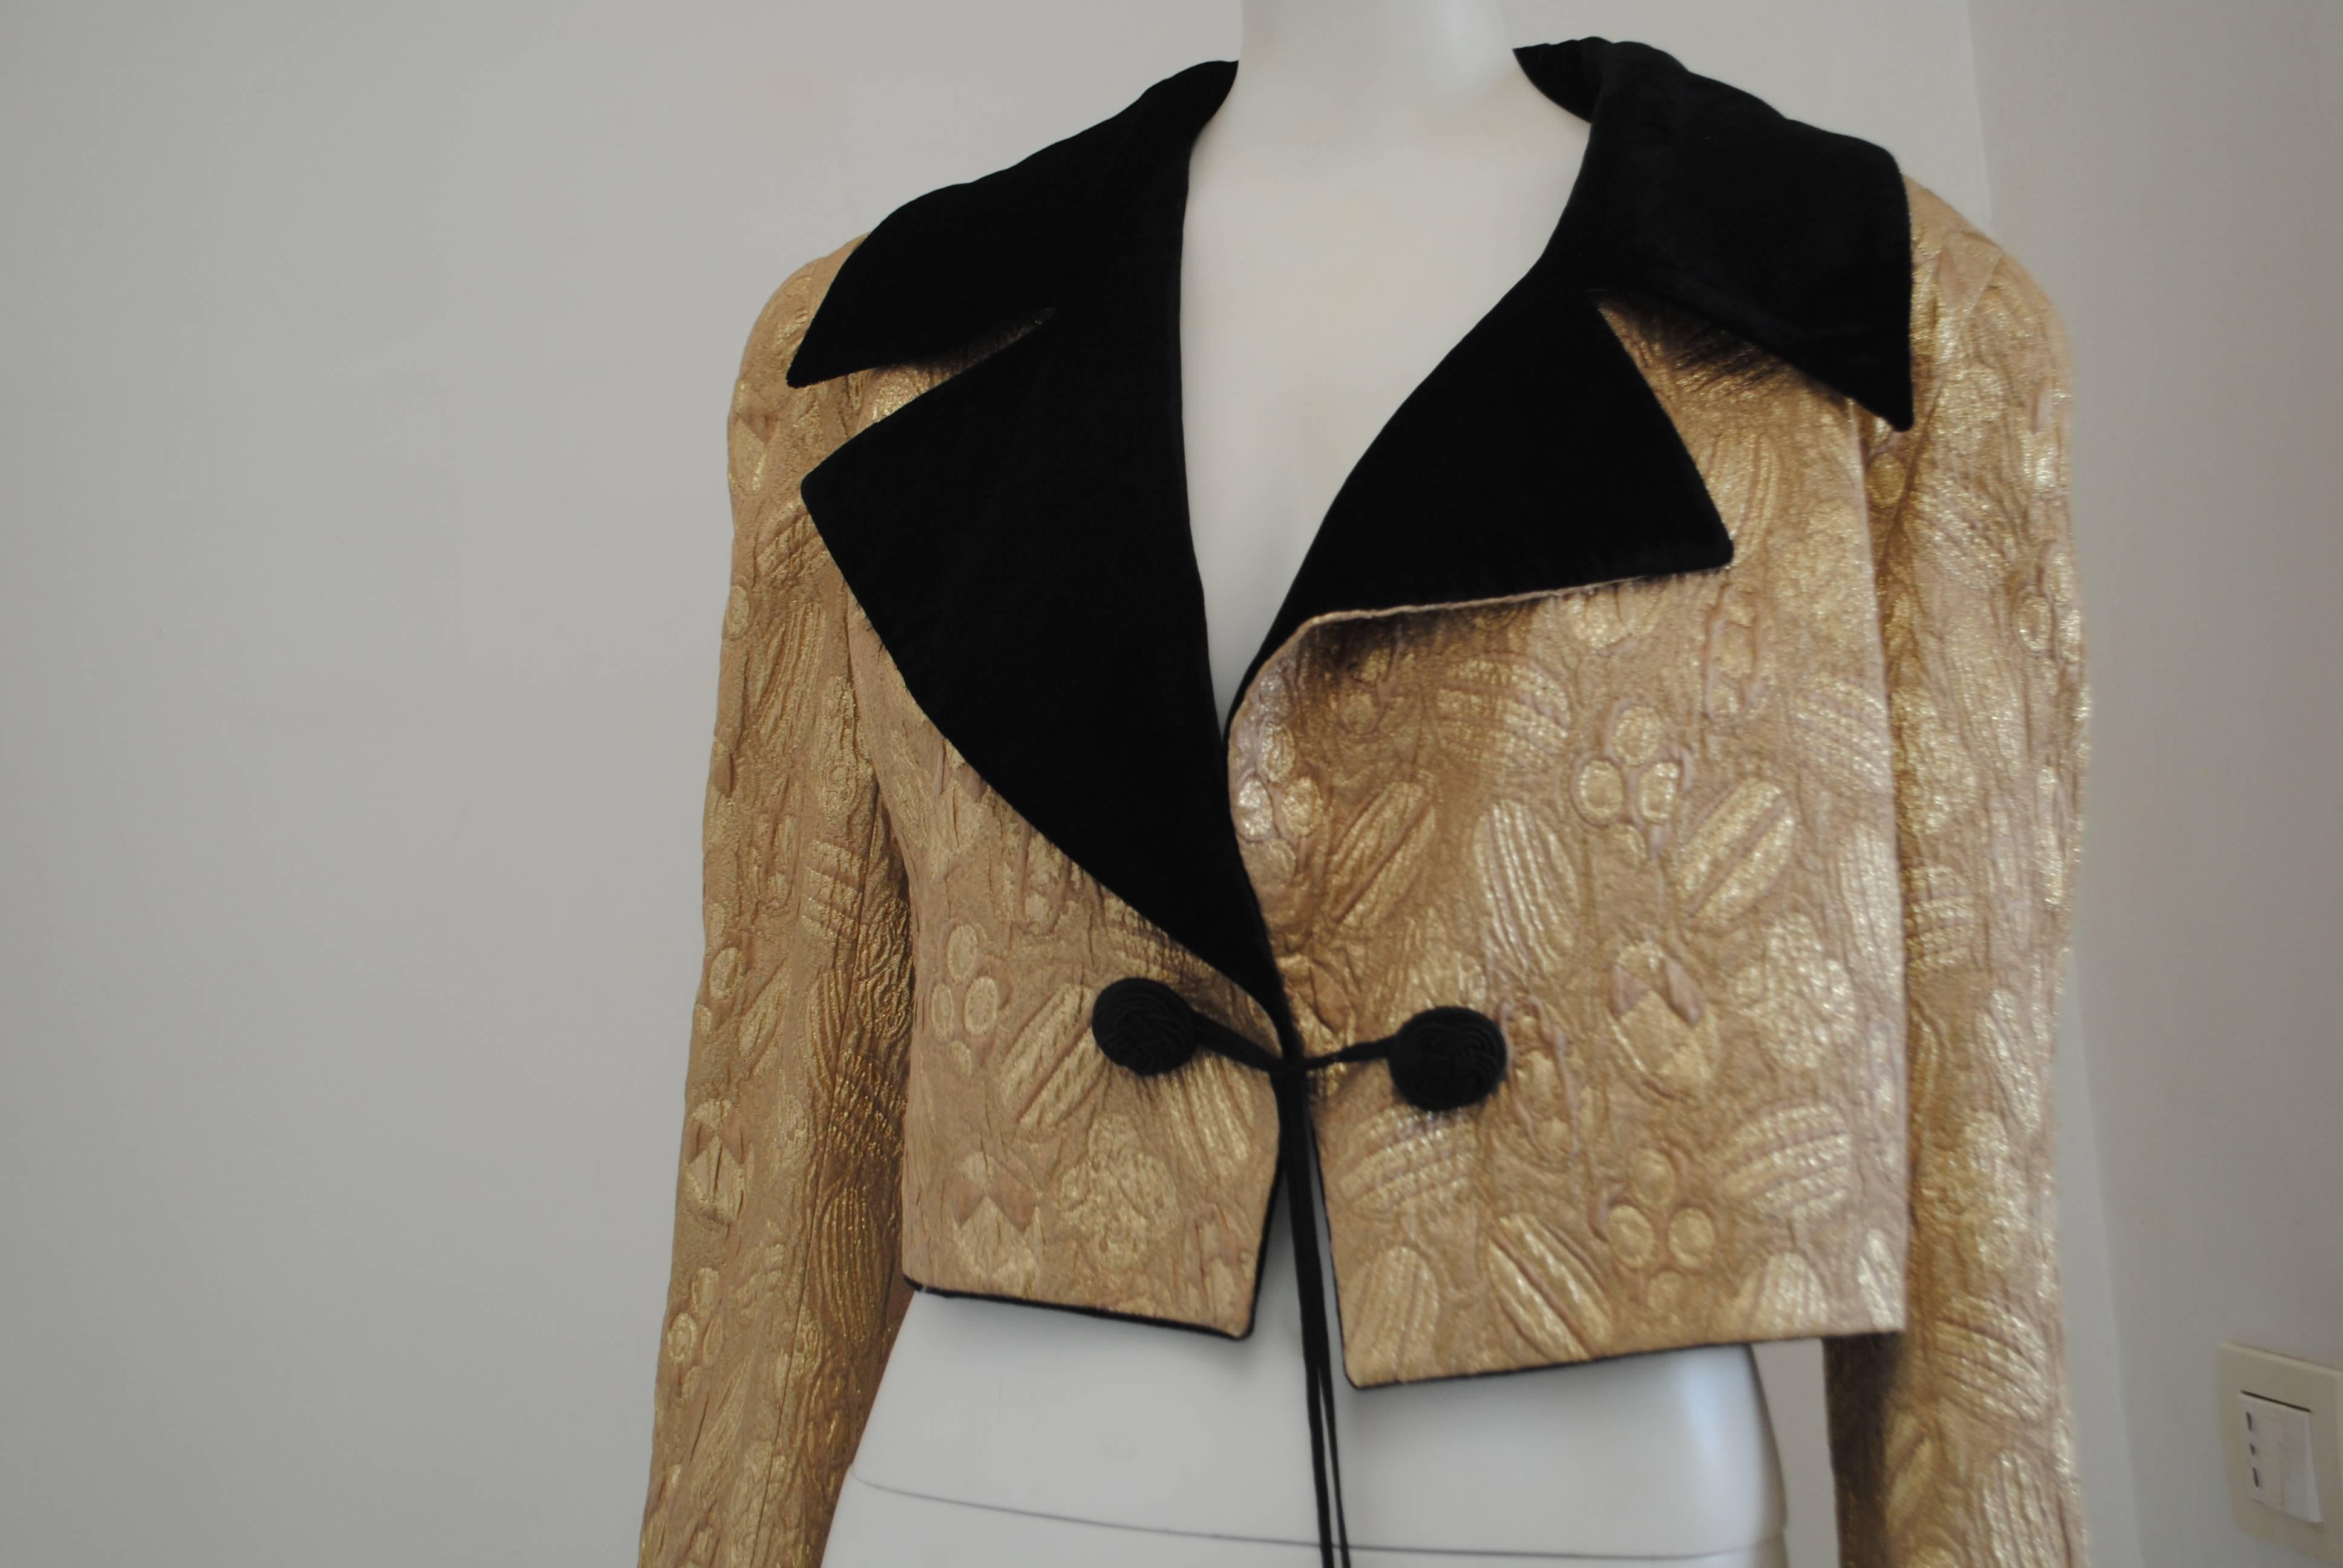 1970s Loretta di Lorenzo Gold and black Velvet Jacket

Gold tone jacket with black velvet jacket totally made in italy in italian size range 42

Composition: Wool, silk and others